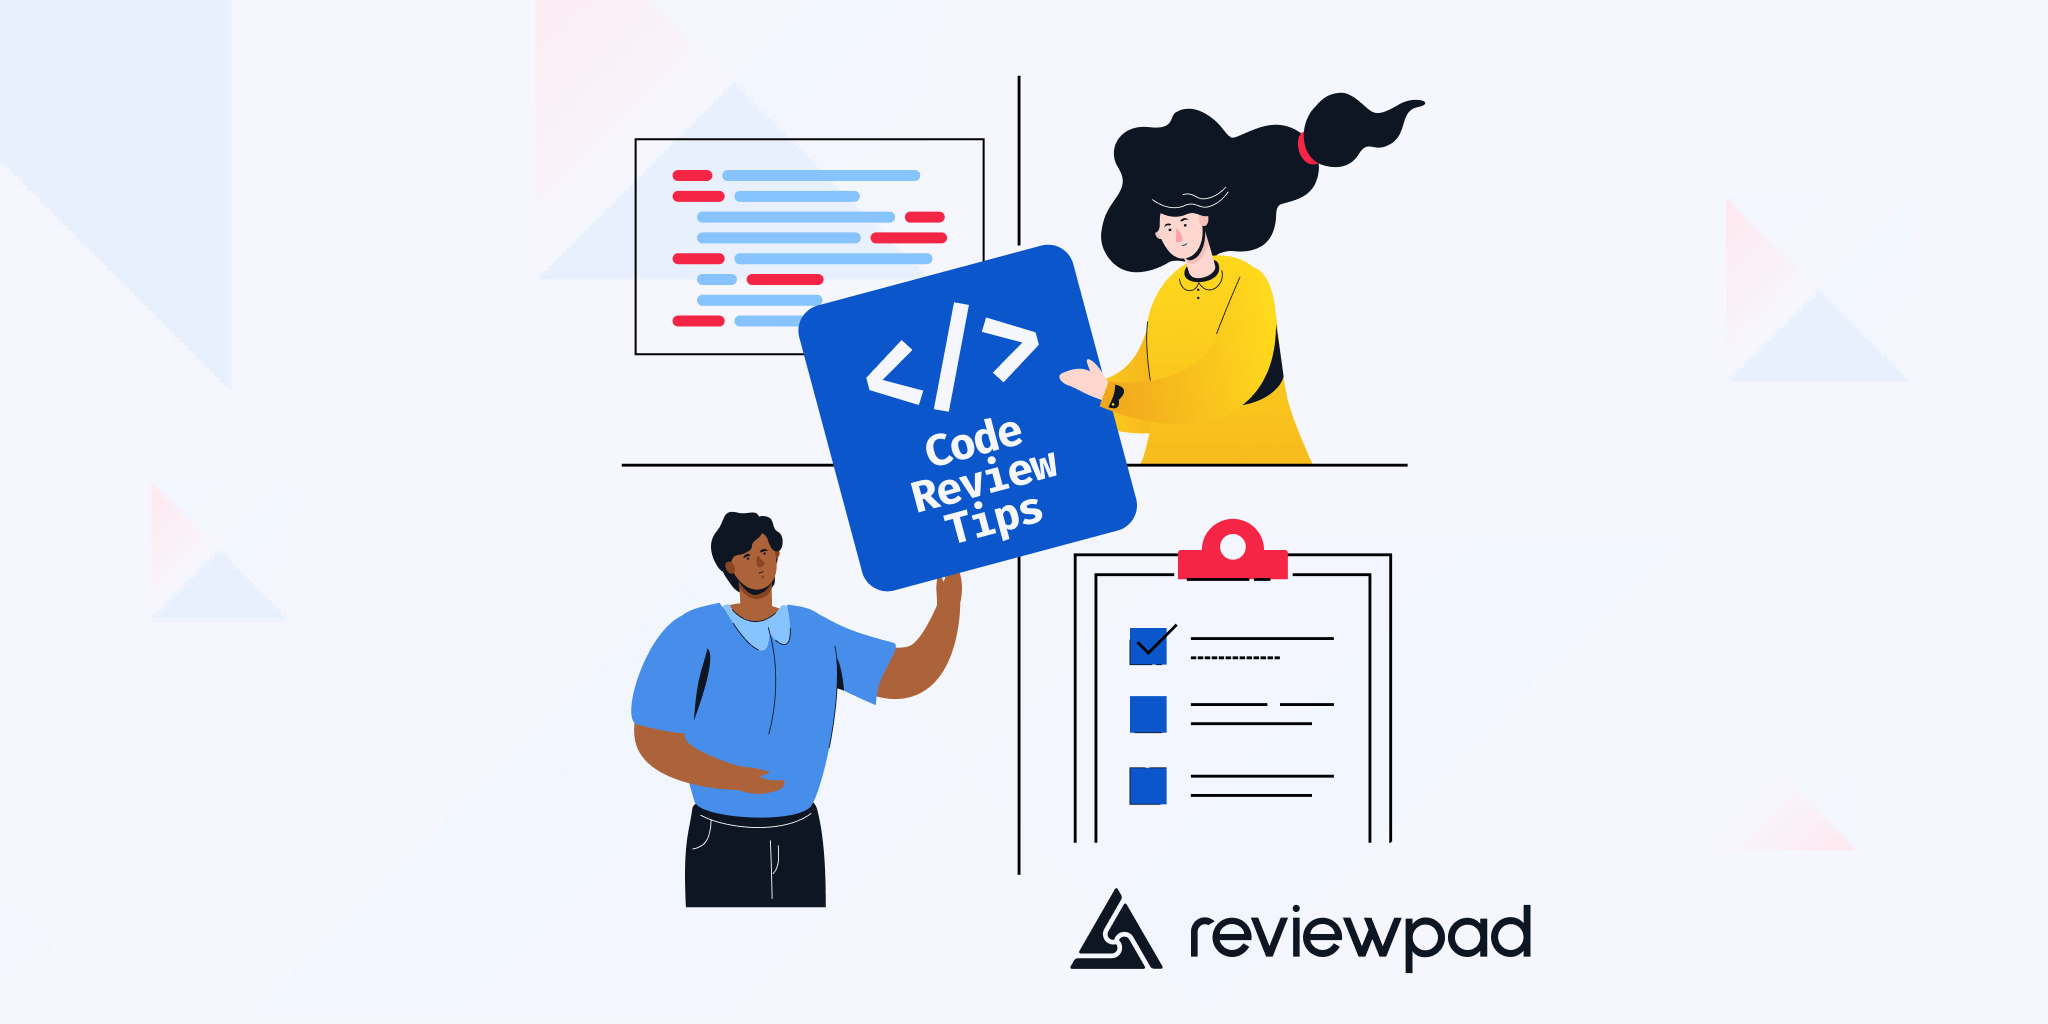 Six best practices to improve your code reviews